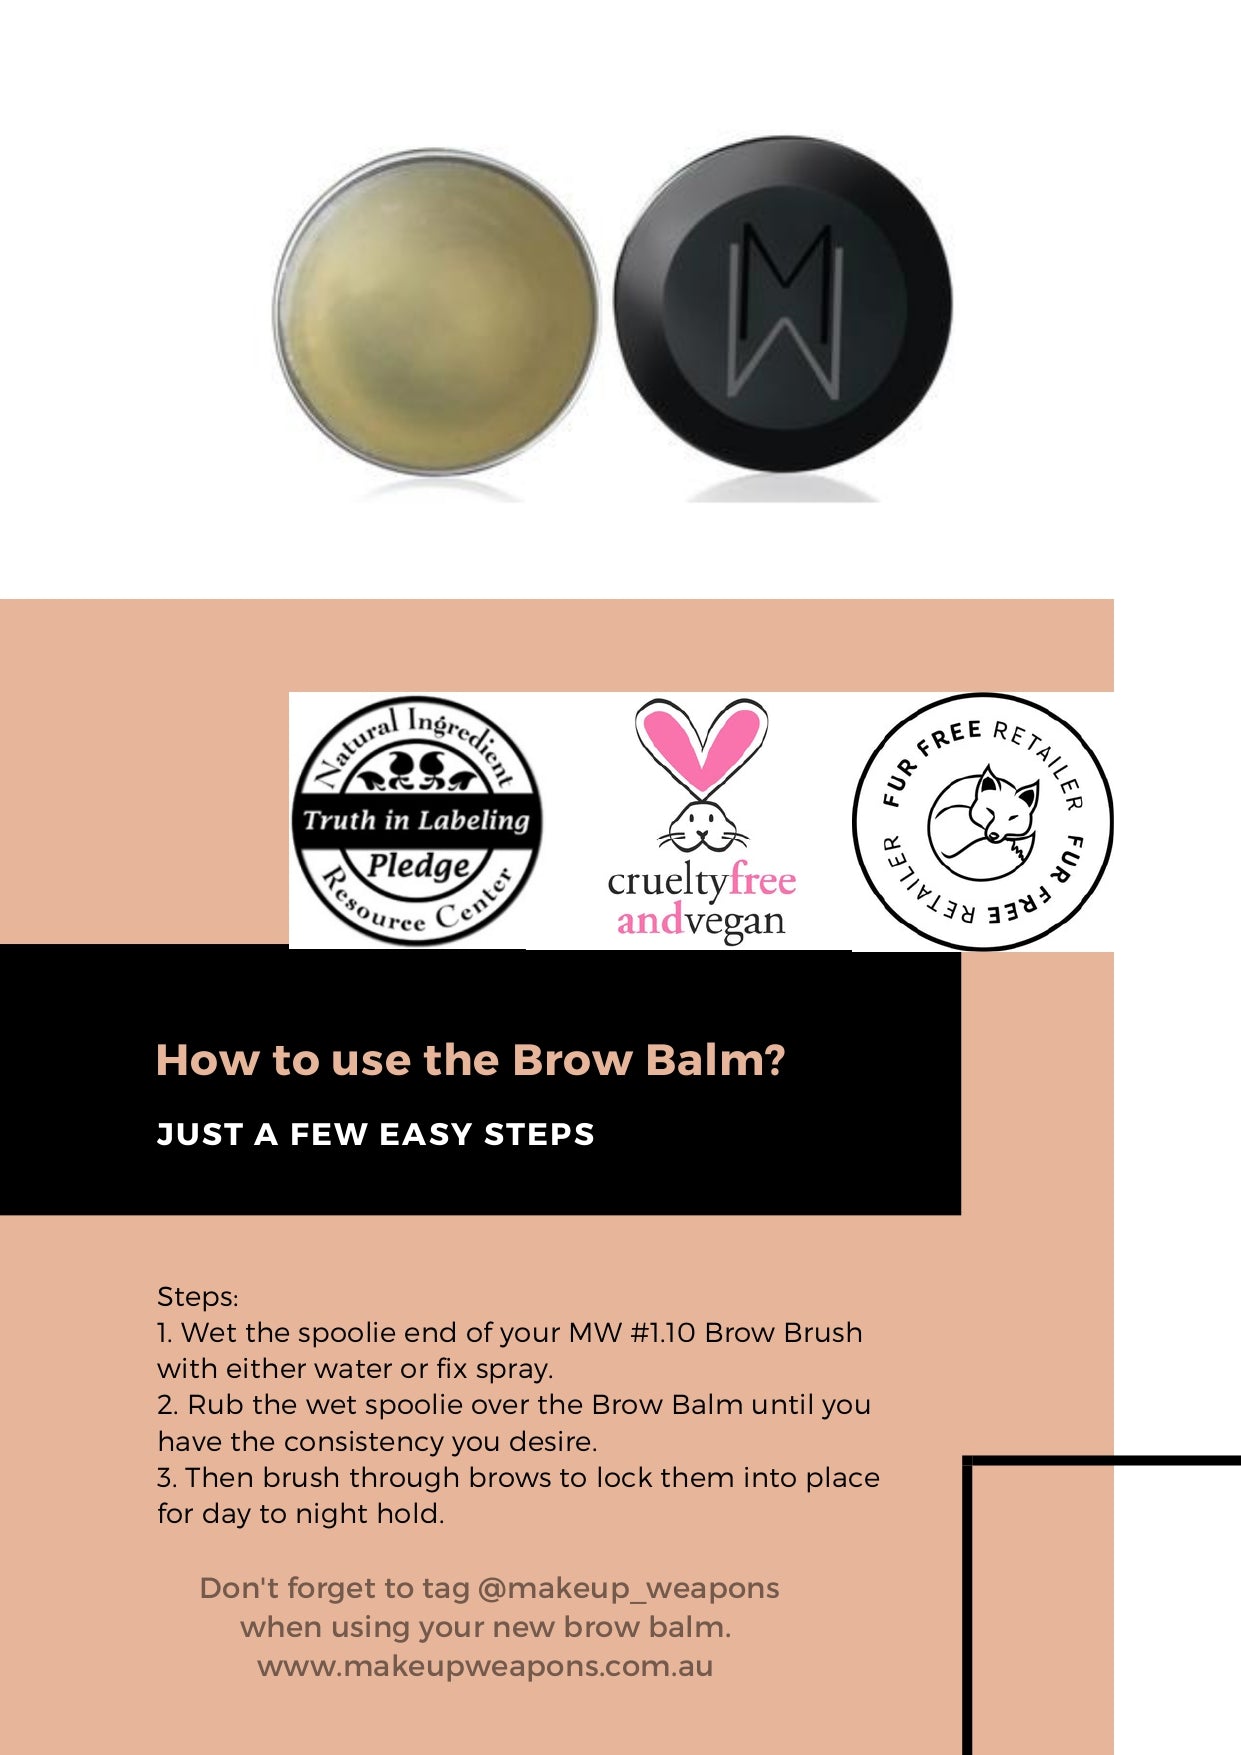 Brow Balm Conditioning and Brow Styling, Accessories, Makeup Weapons, Makeup Weapons, [variant_title], [option1], [option2], [option3]. We recommend using the value: Brow Balm Conditioning and Brow Styling - Makeup Weapons